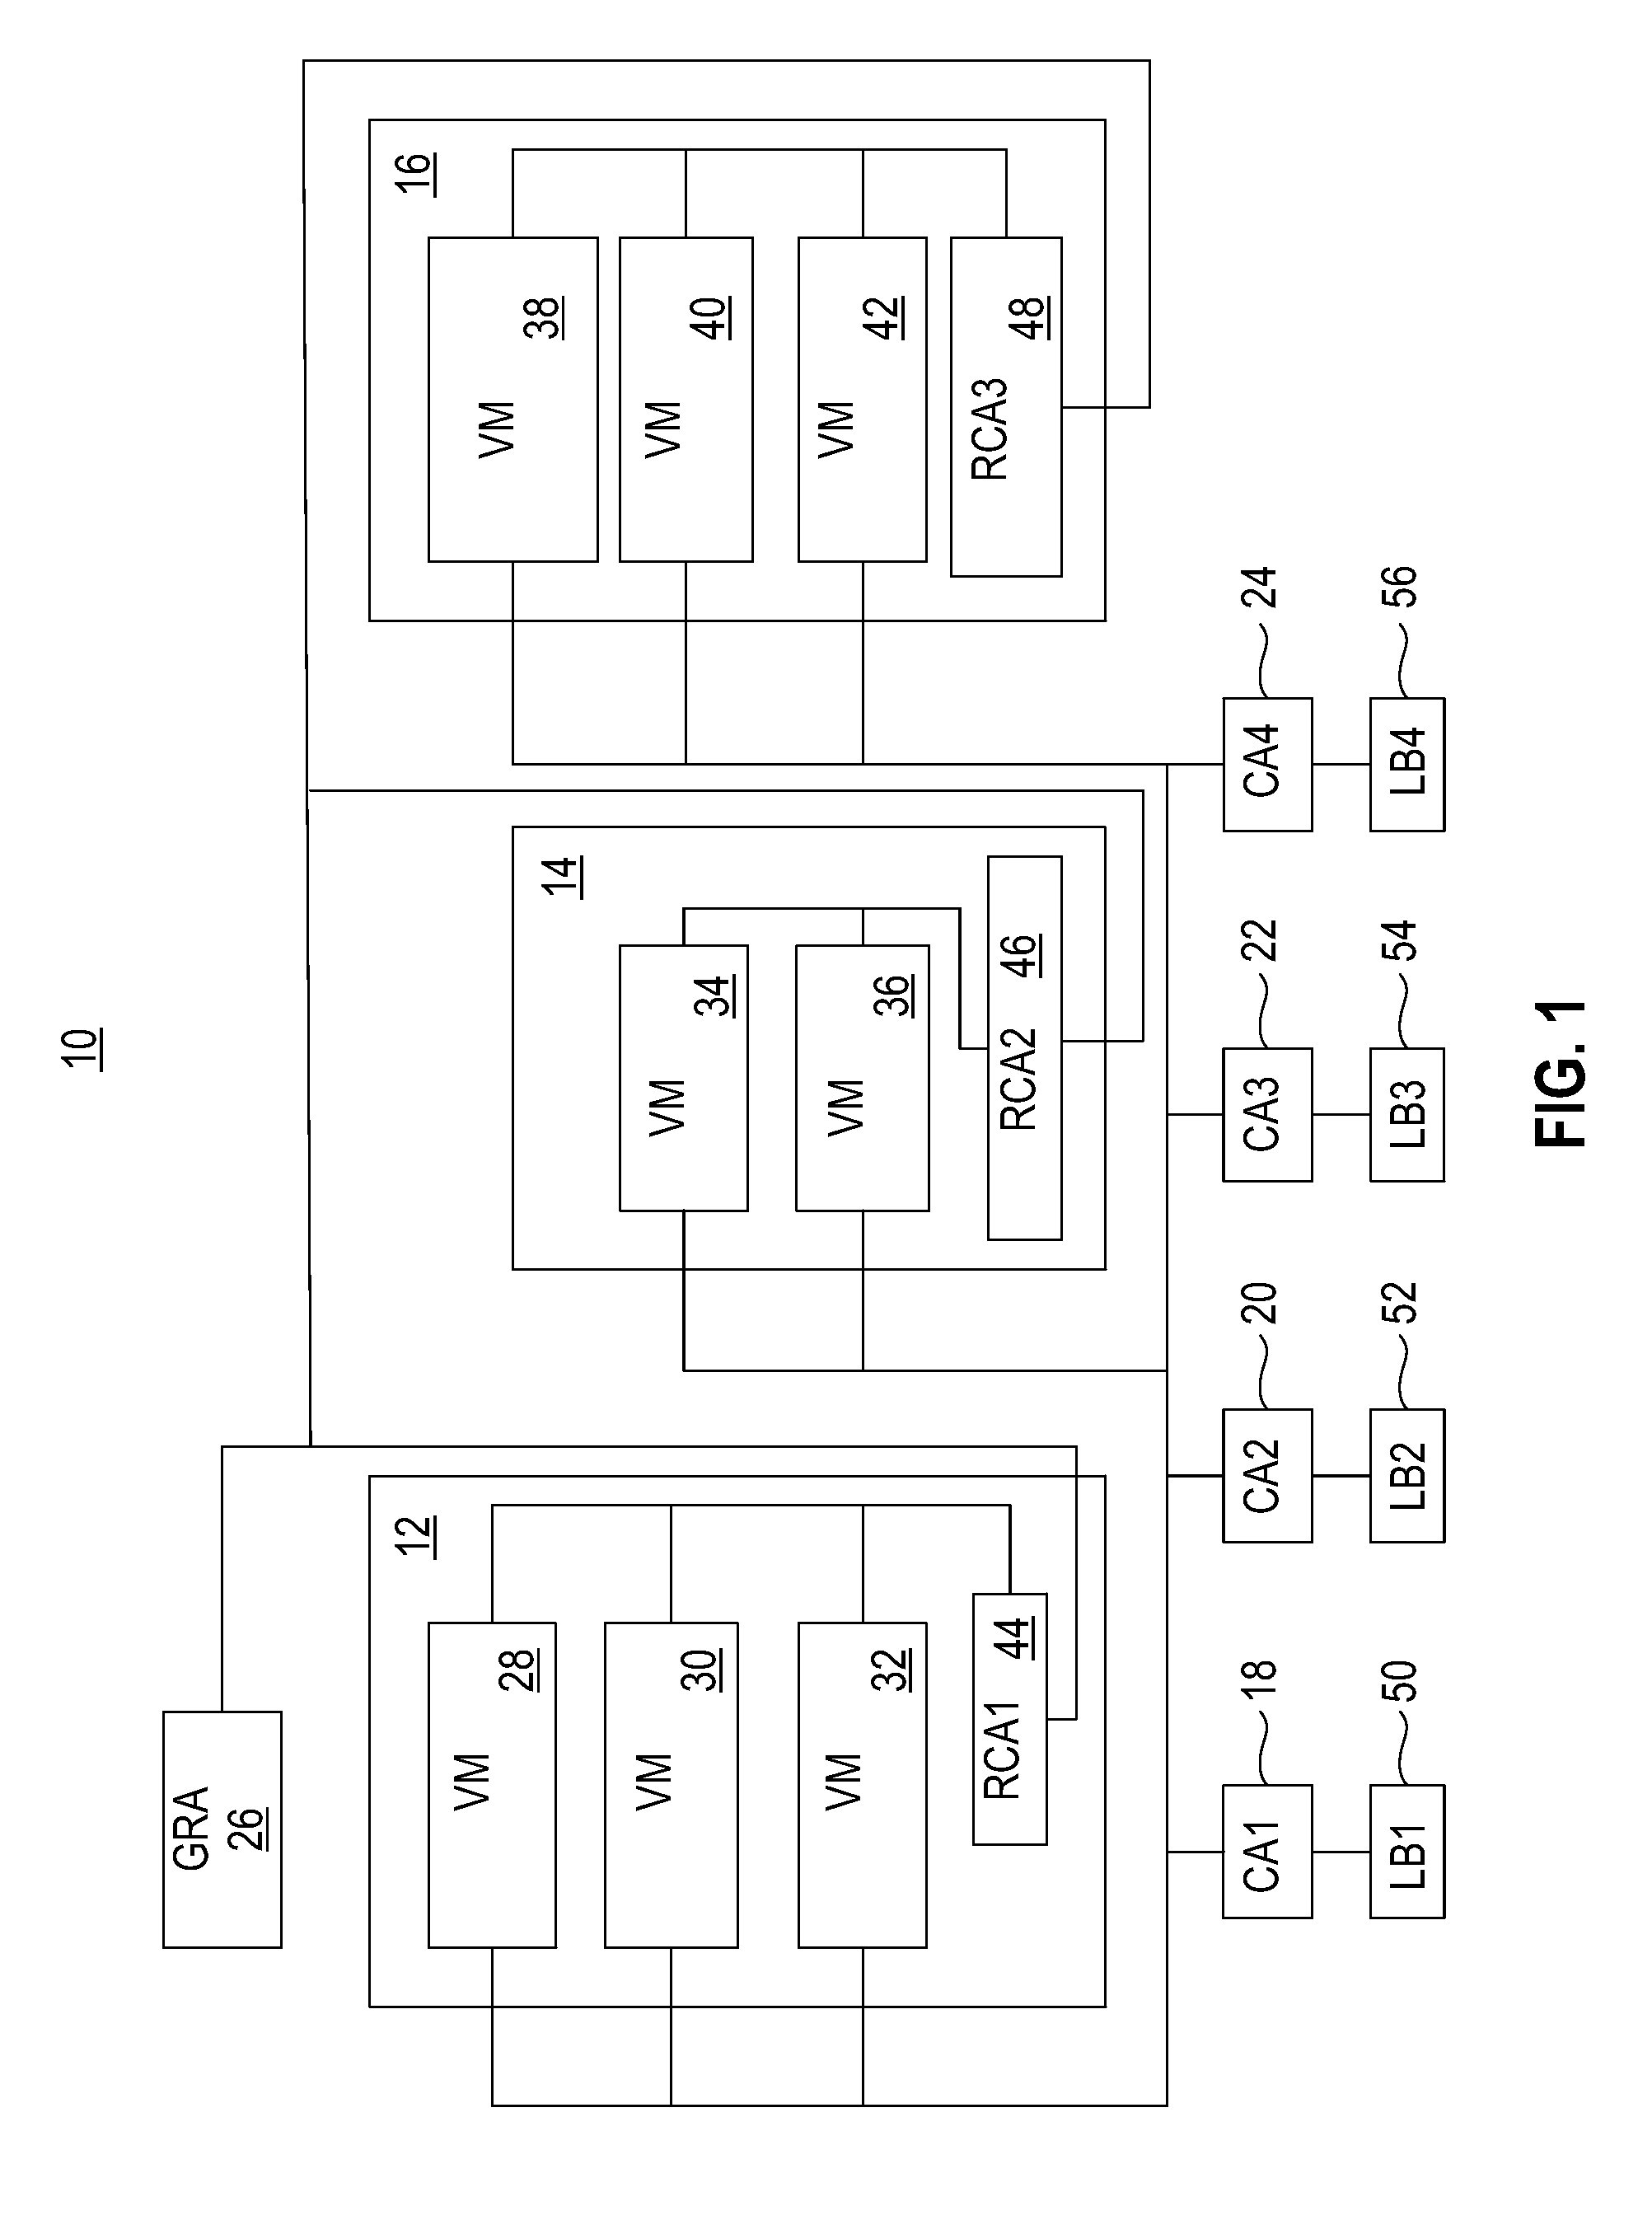 System and method for providing a scalable on demand hosting system